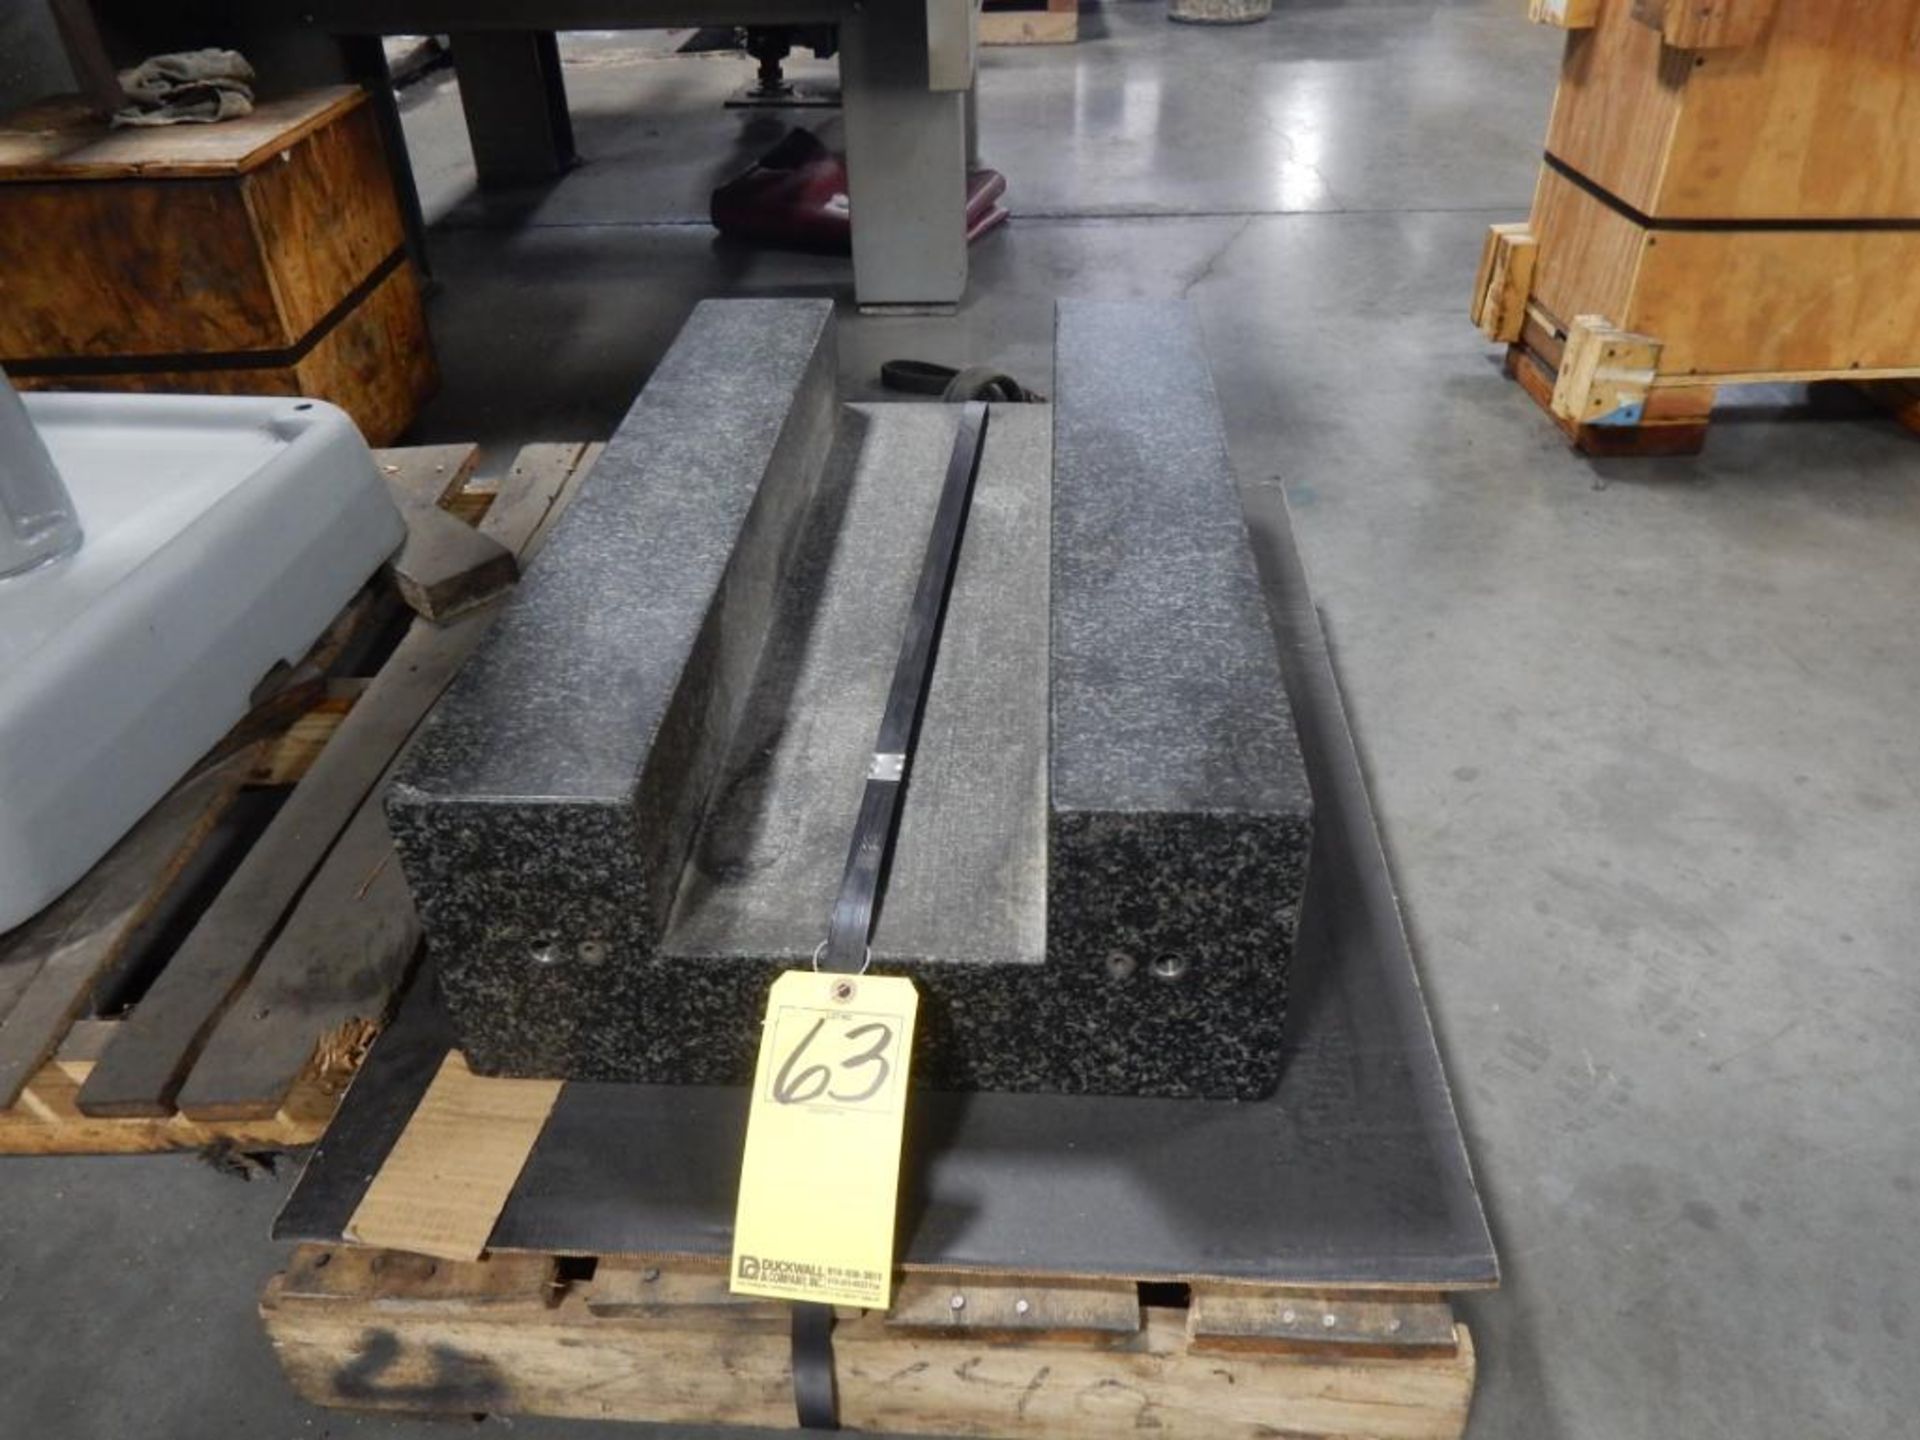 BLACK GRANITE 18" X 8" X 30" CHANNEL-CUT SURFACE PLATE - Image 2 of 2